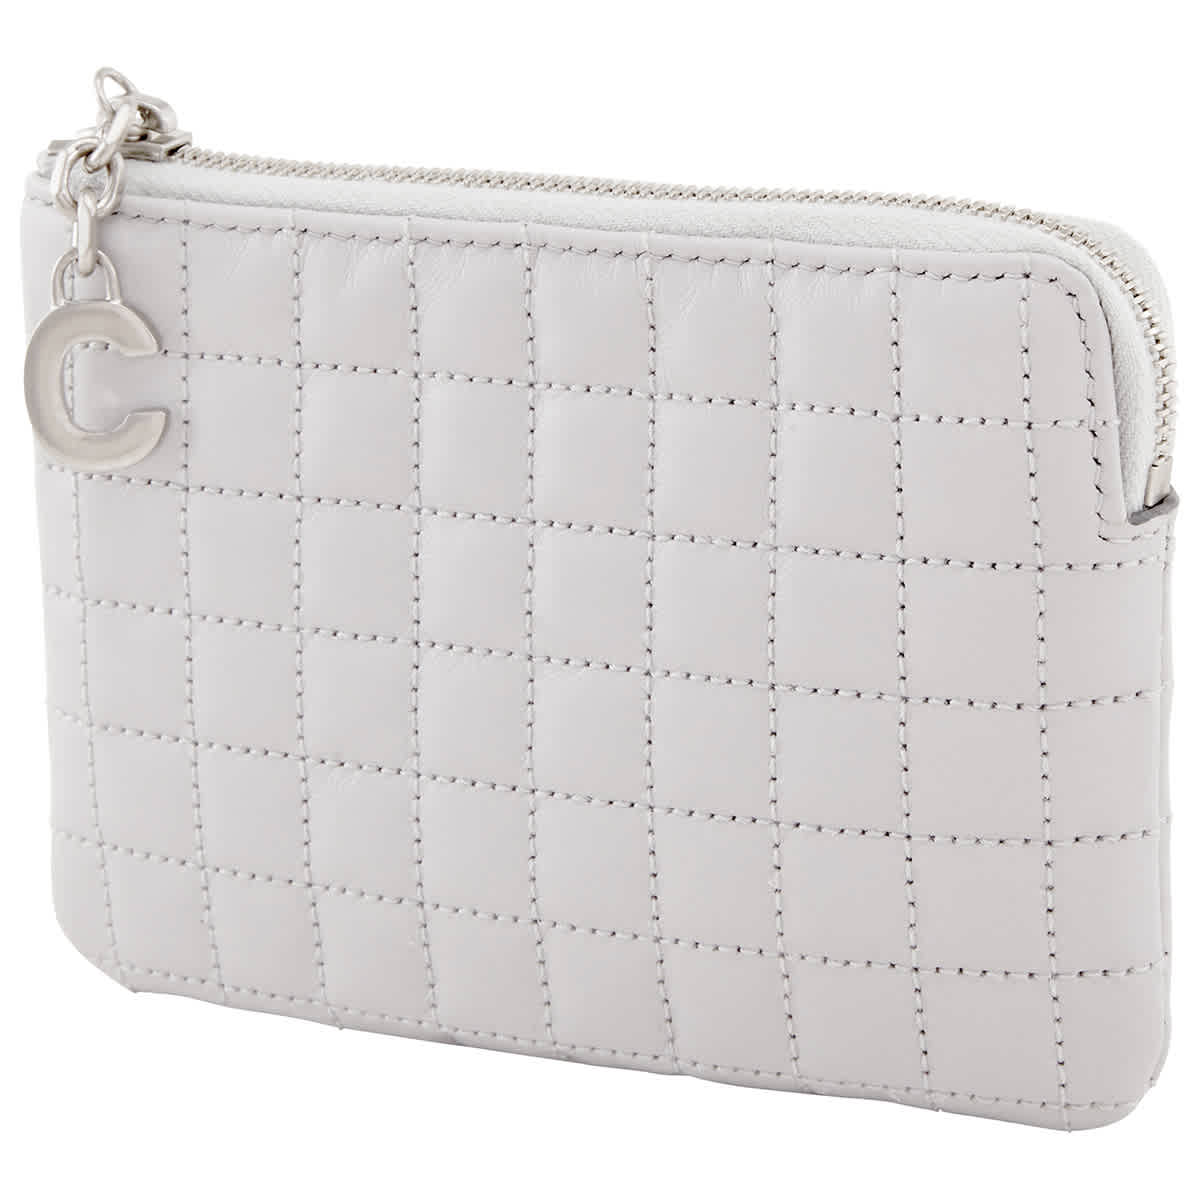 Celine Quilted Calfskin Pouch- Light Grey In Gold Tone,grey